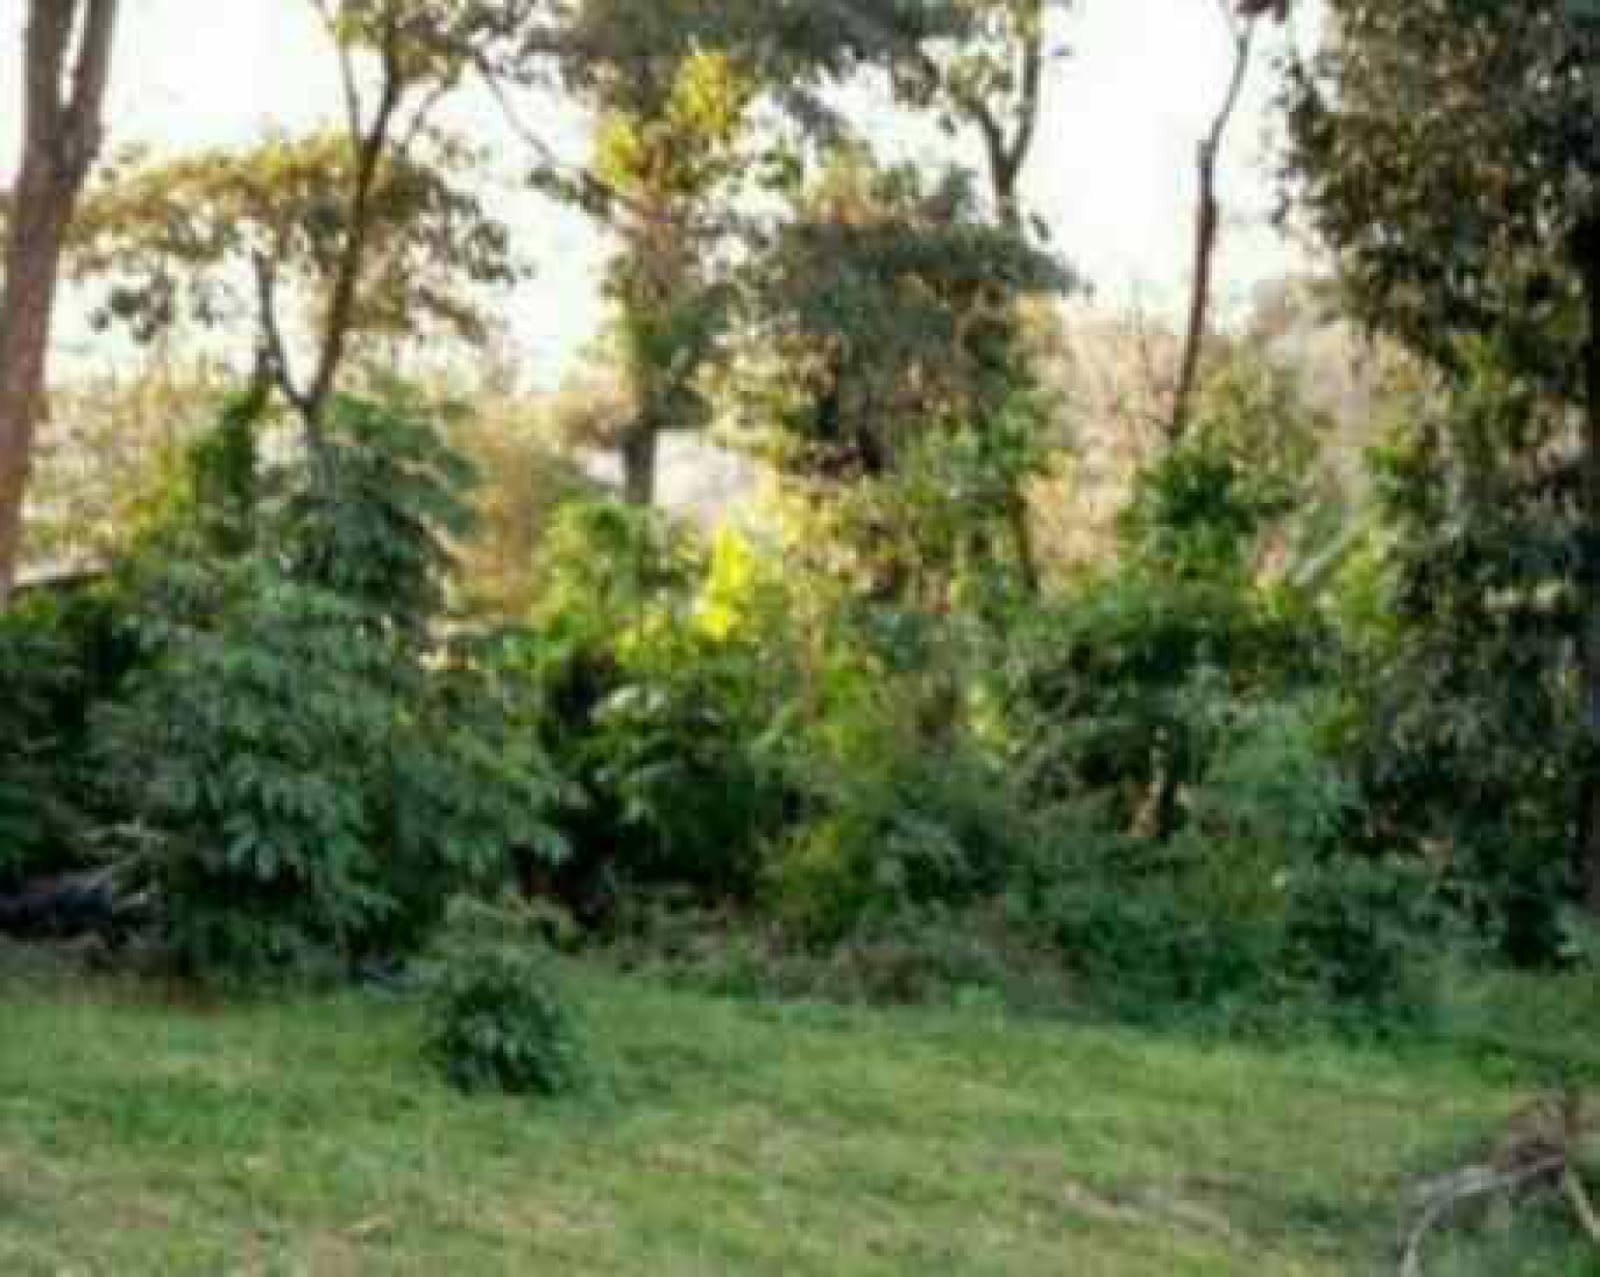 Land for sale in Karen Tree lane 1 Acre Ready Title Deed QUICK SALE Exclusive